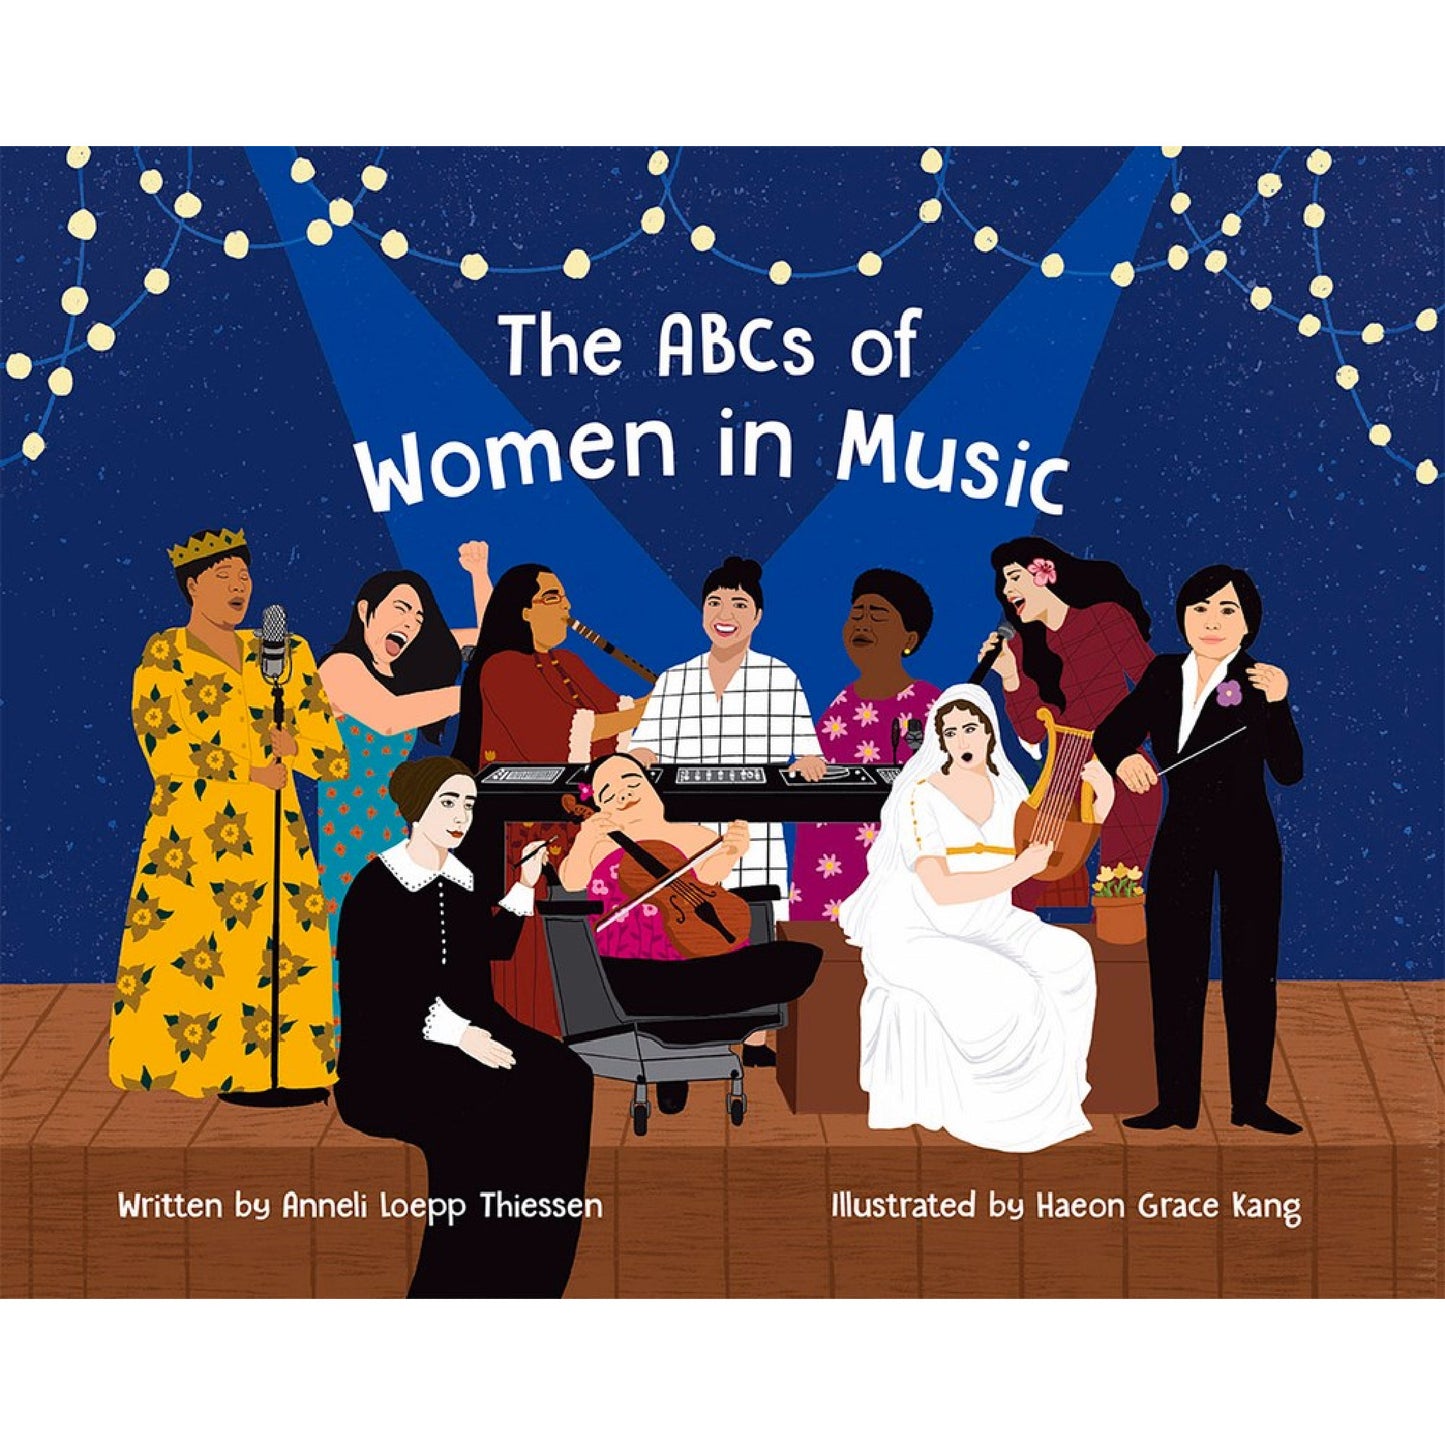 The ABCs of Women in Music, Thiessen/Kang